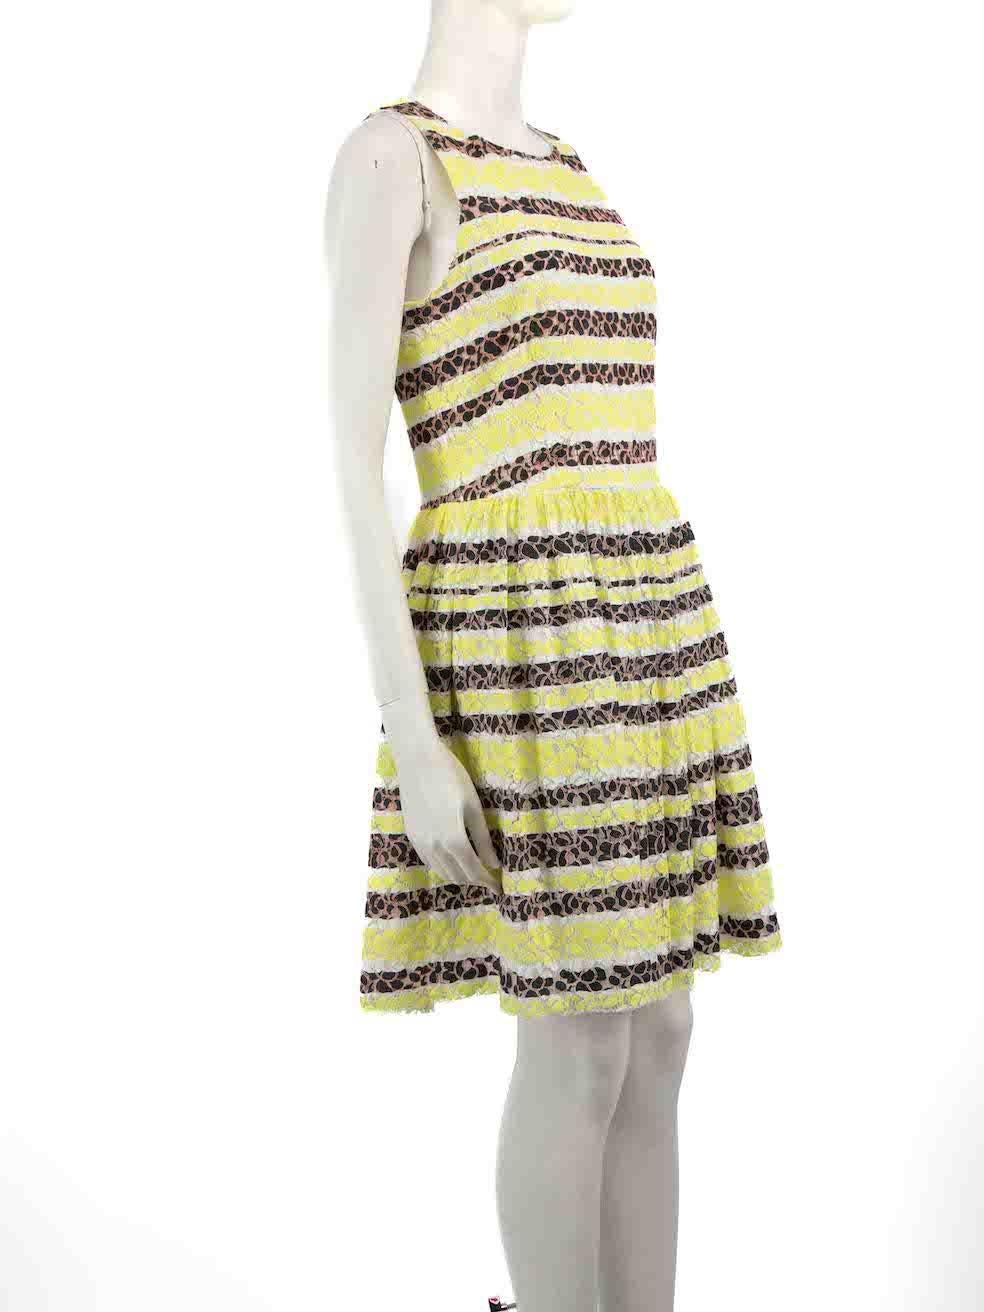 CONDITION is Very good. Hardly any visible wear to dress is evident on this used MSGM designer resale item.
 
 
 
 Details
 
 
 Neon yellow
 
 Lace
 
 Dress
 
 Striped pattern
 
 Sleeveless
 
 Gathered skirt
 
 Knee length
 
 Back zip fastening
 
 
